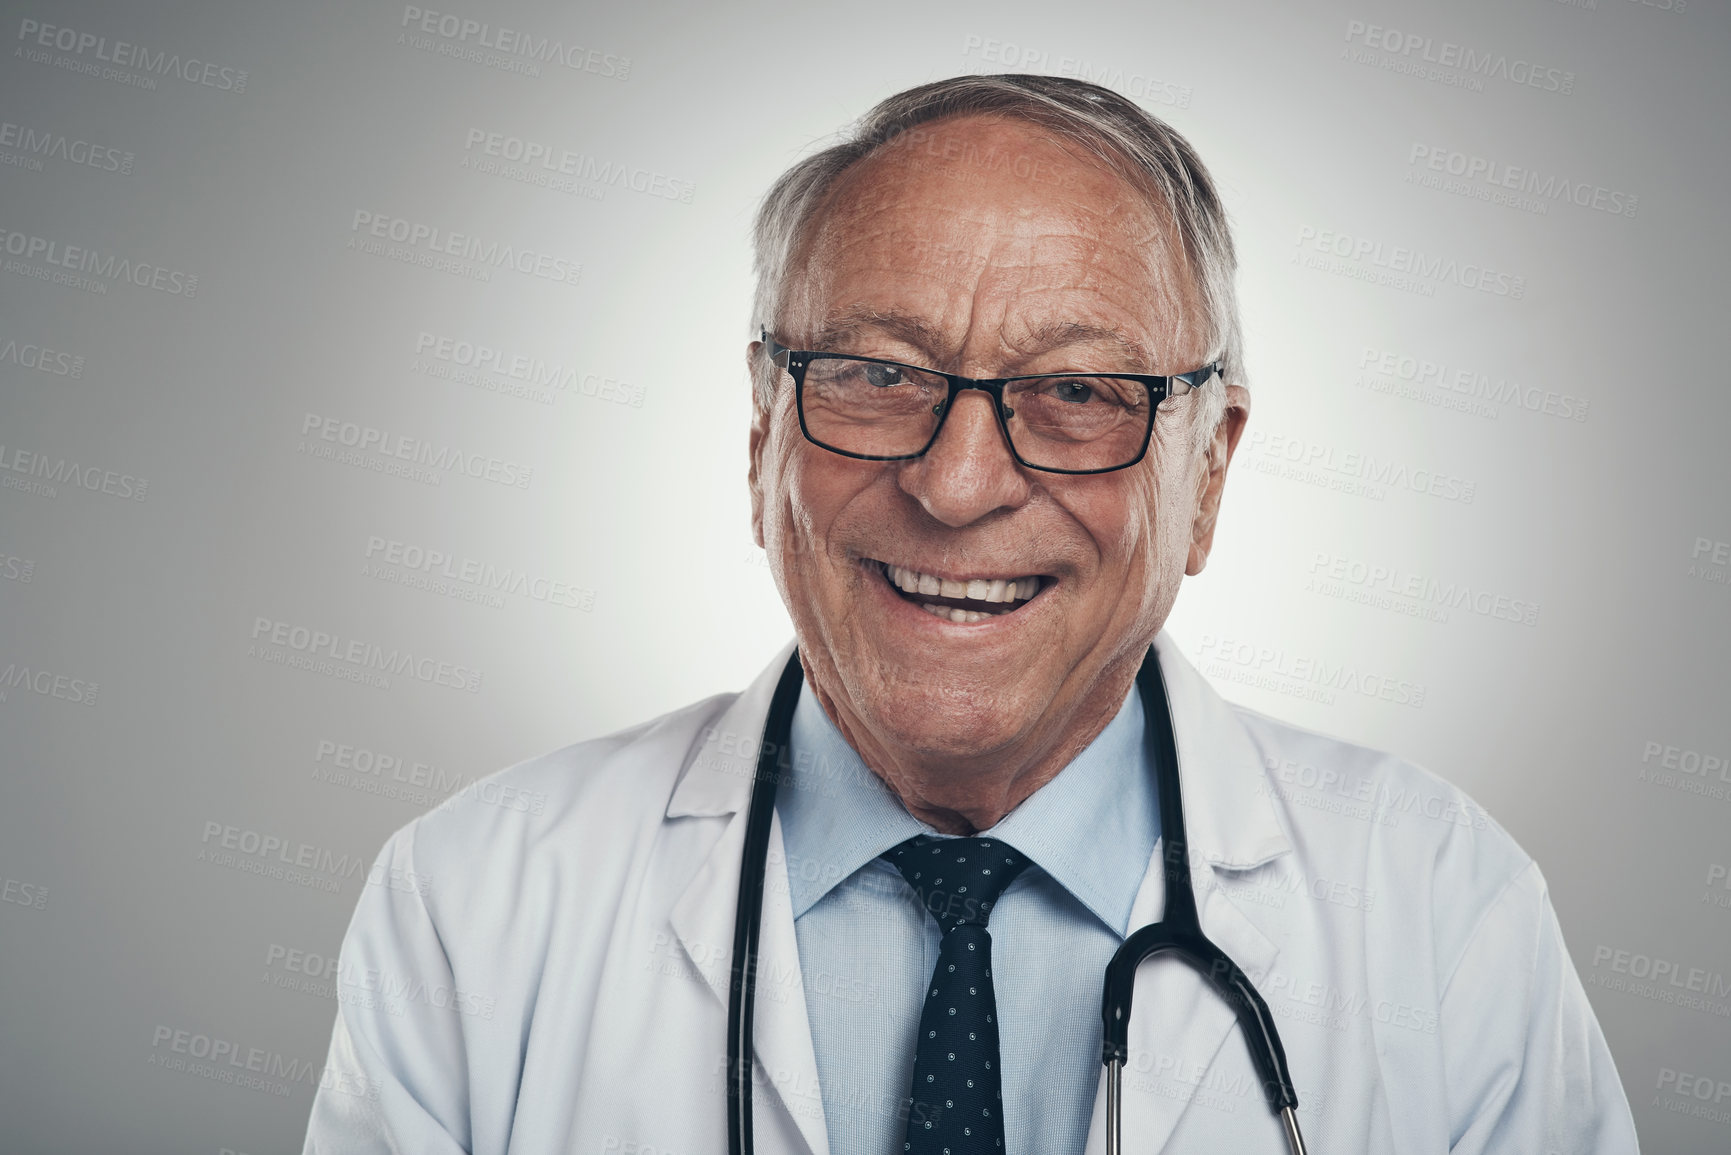 Buy stock photo Shot of a happy elderly male doctor in the studio against a grey background